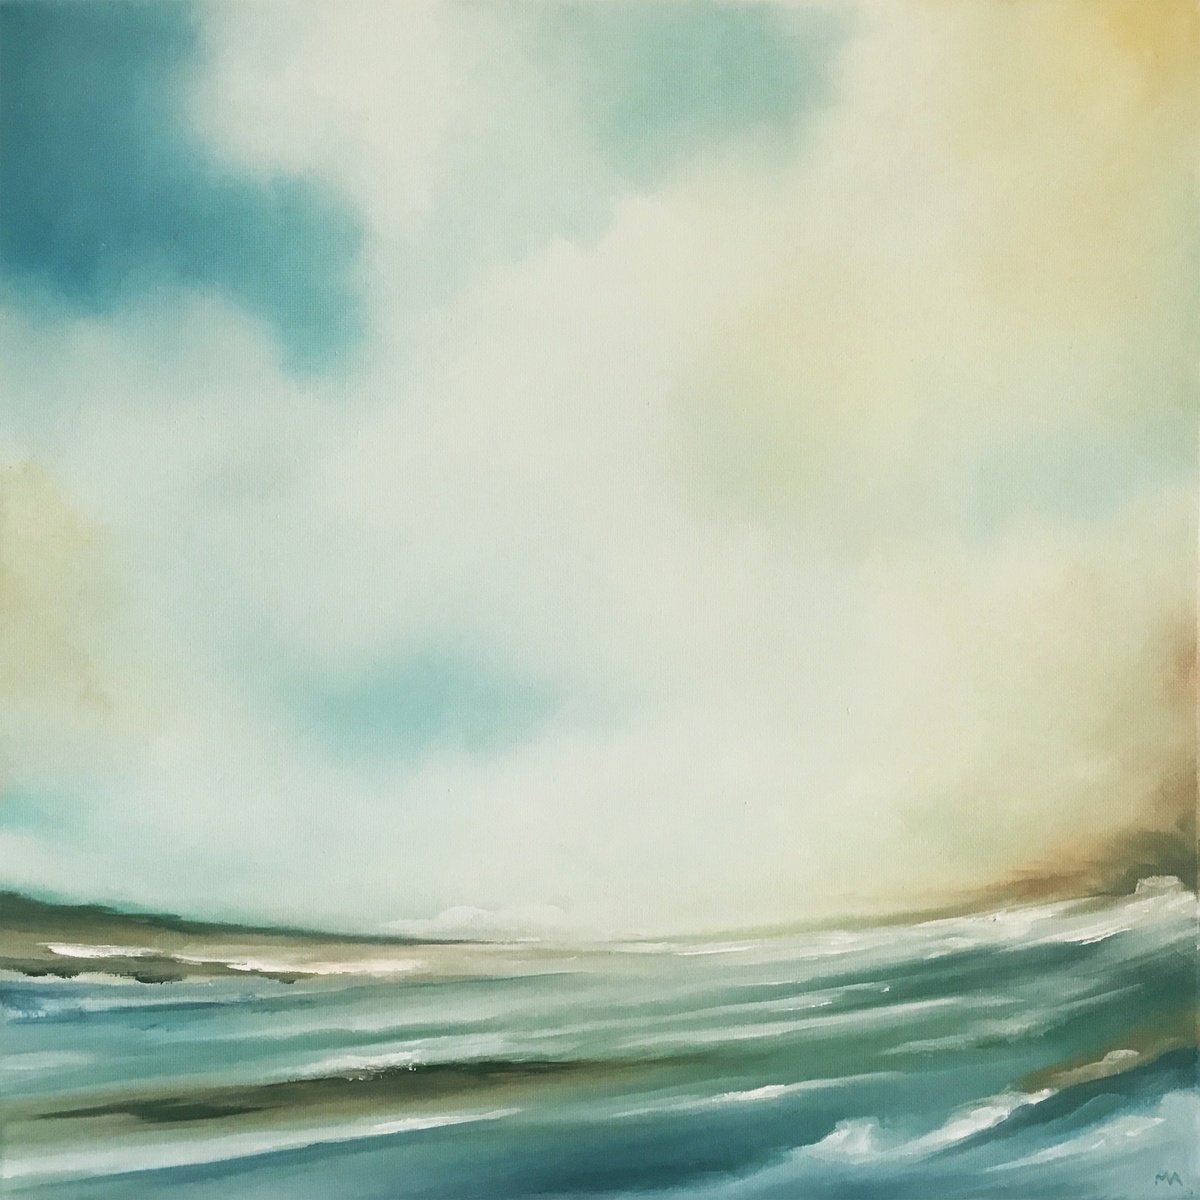 The Winds Will Carry Us - Original Seascape Oil Painting on Stretched Canvas by MULLO ART